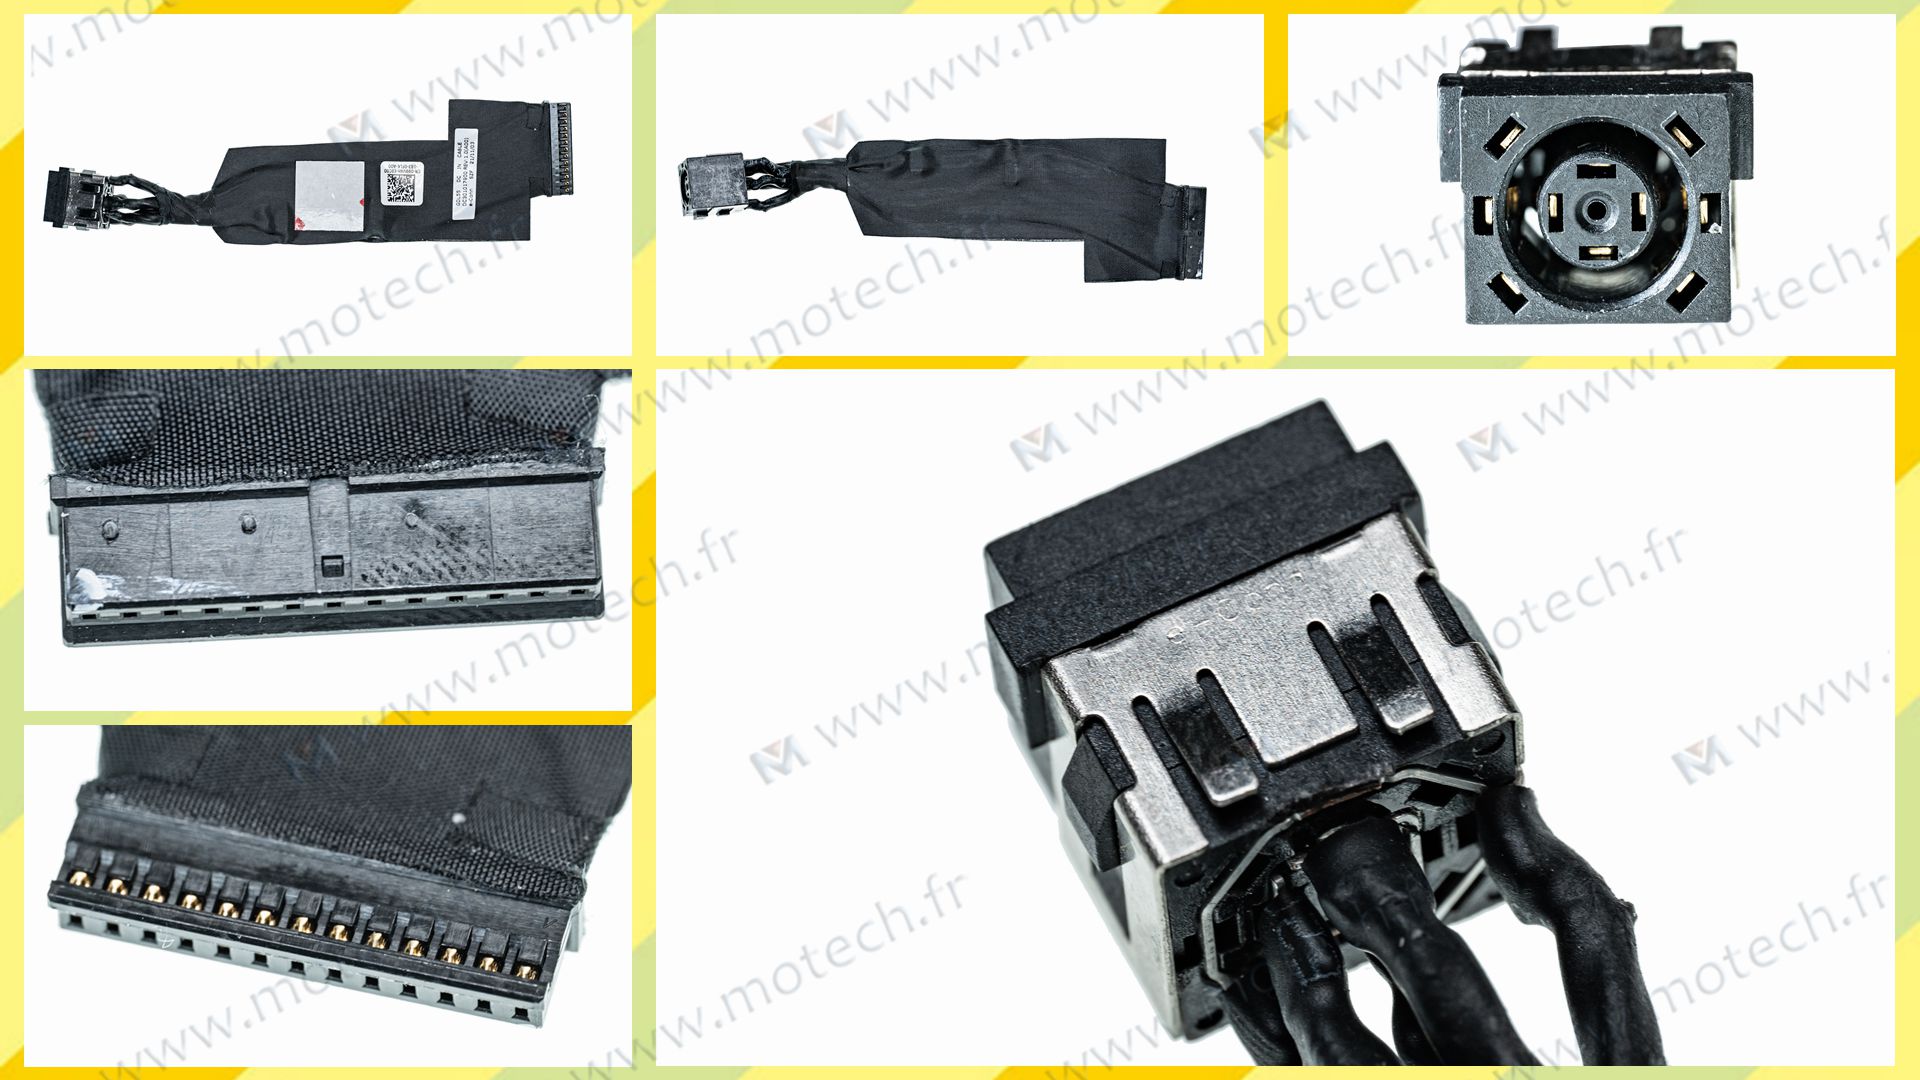 Dell G15 5515 charging connector, Dell G15 5515 DC Power Jack, Dell G15 5515 DC IN Cable, Dell G15 5515 Power Jack, Dell G15 5515 plug, Dell G15 5515 Jack socket, Dell G15 5515 connecteur de charge, 